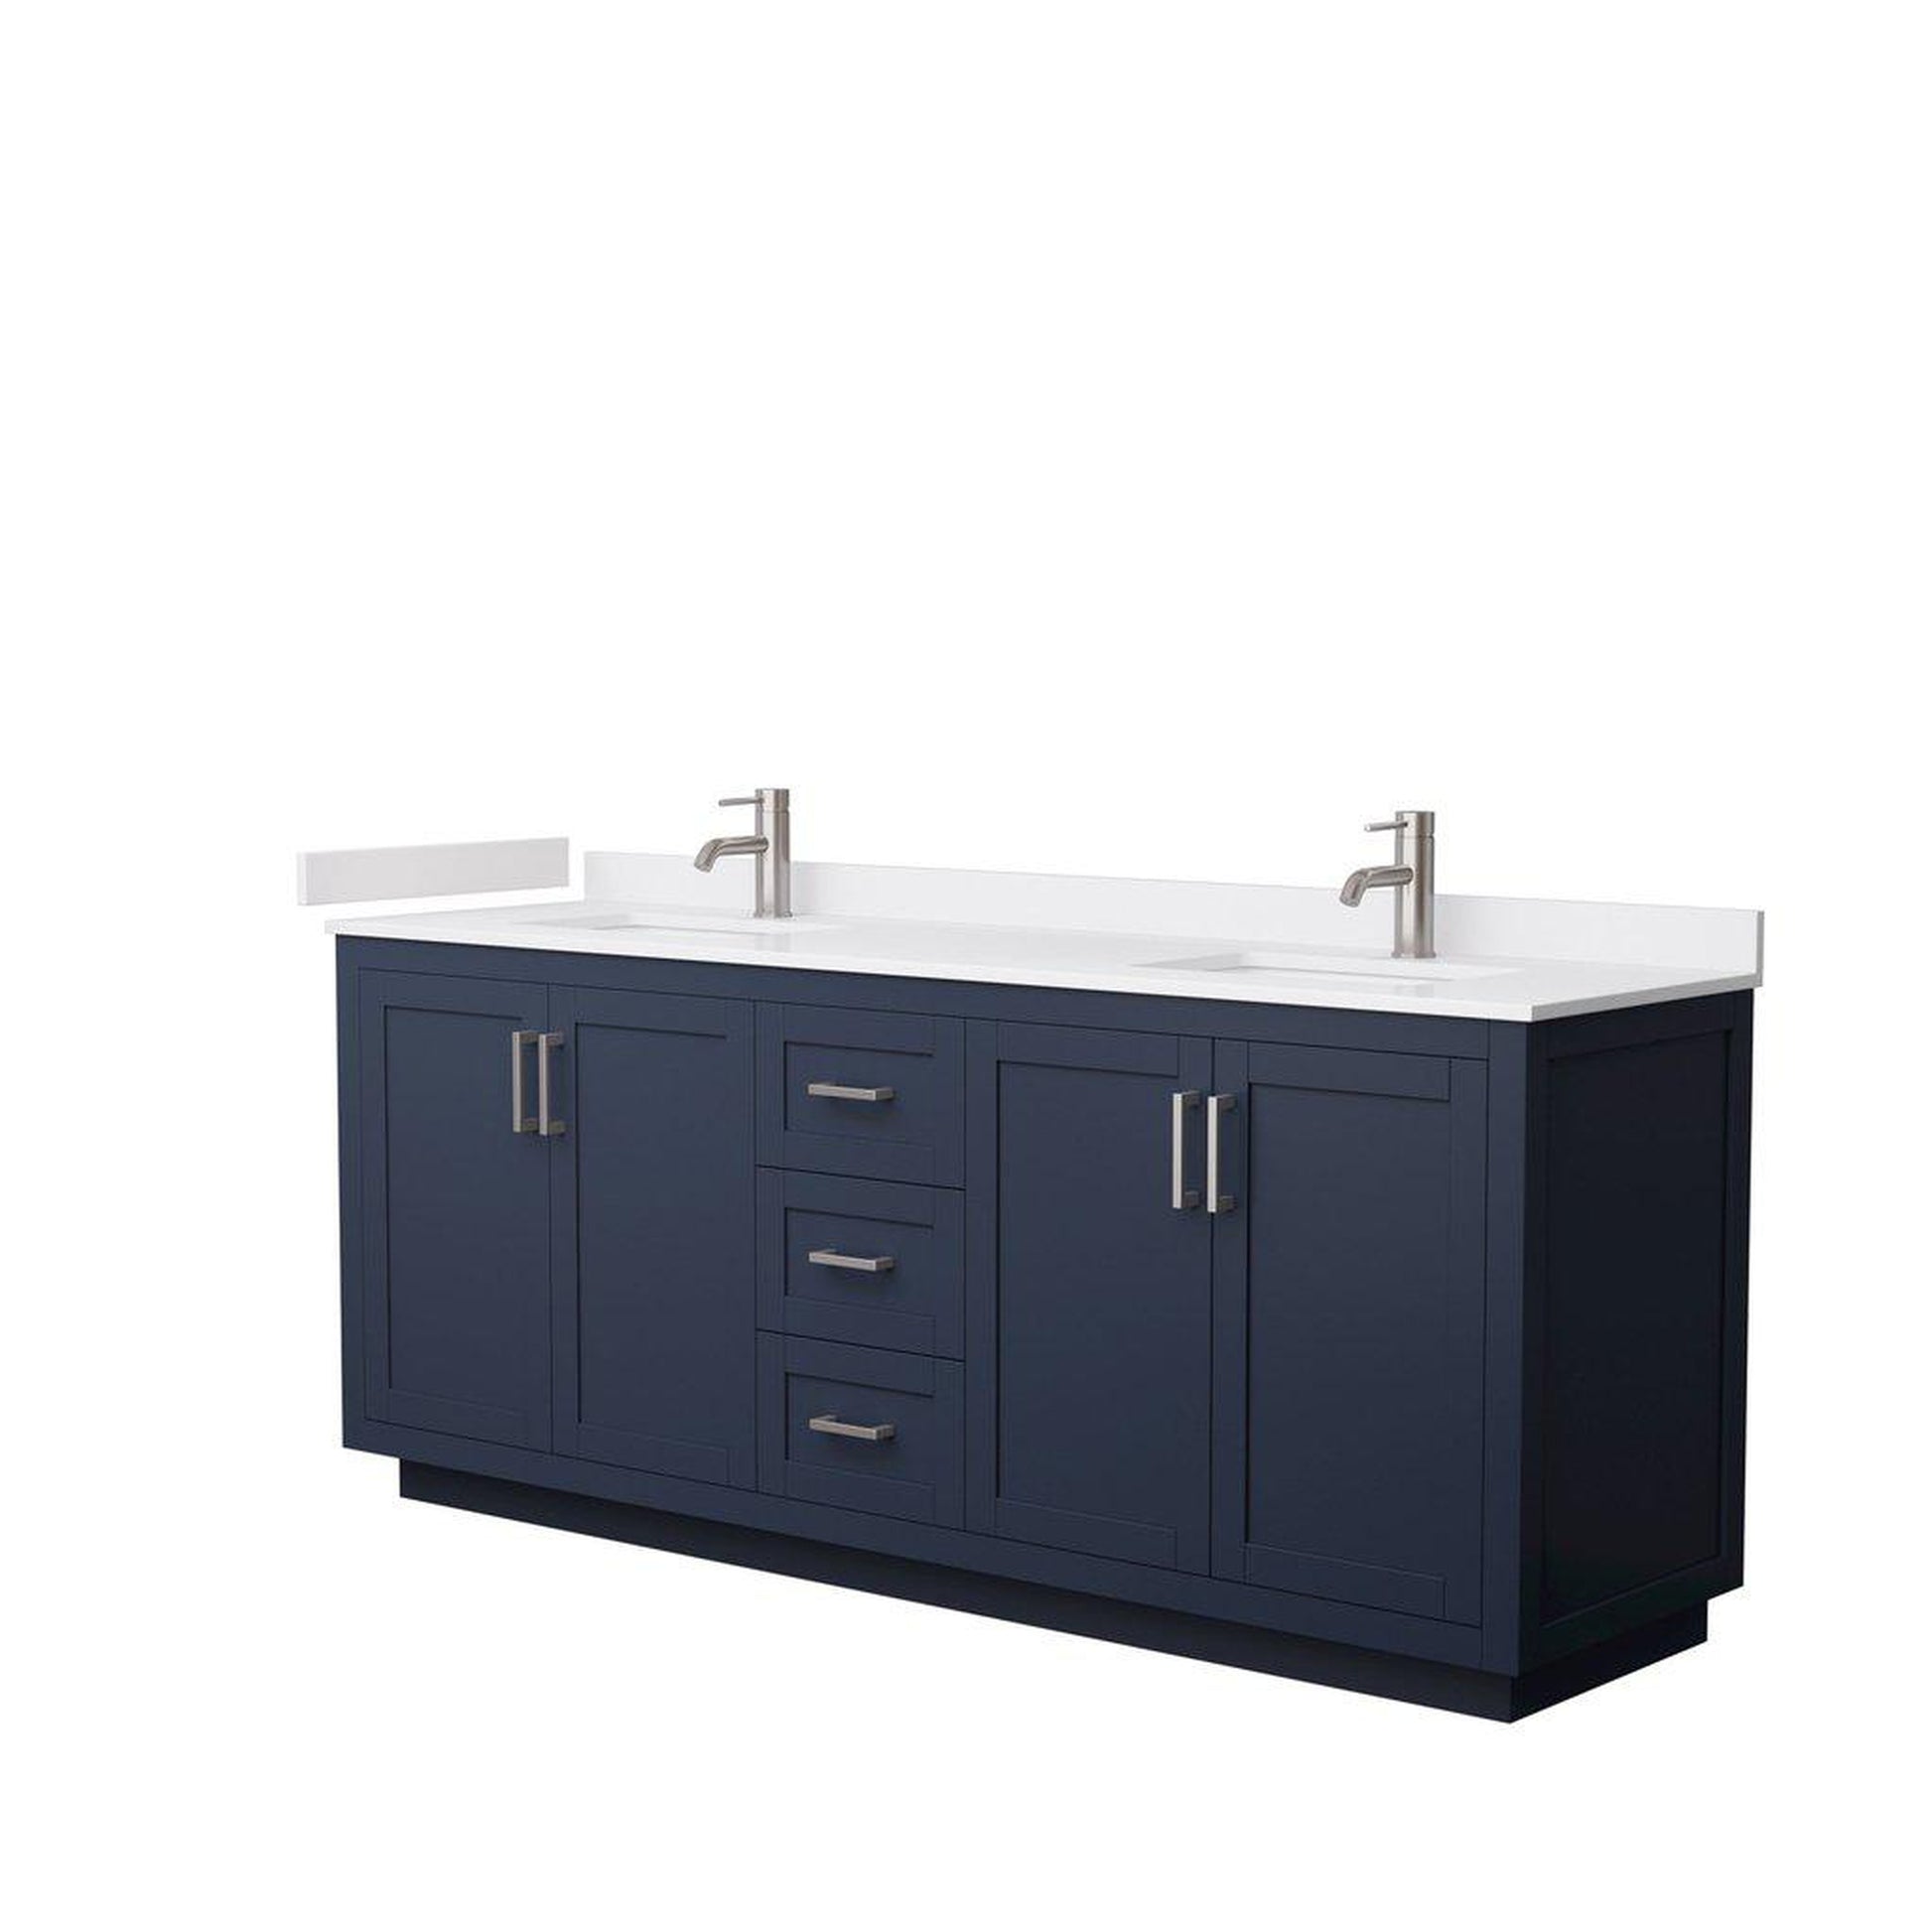 Wyndham Collection Miranda 80" Double Bathroom Dark Blue Vanity Set With White Cultured Marble Countertop, Undermount Square Sink, And Brushed Nickel Trim